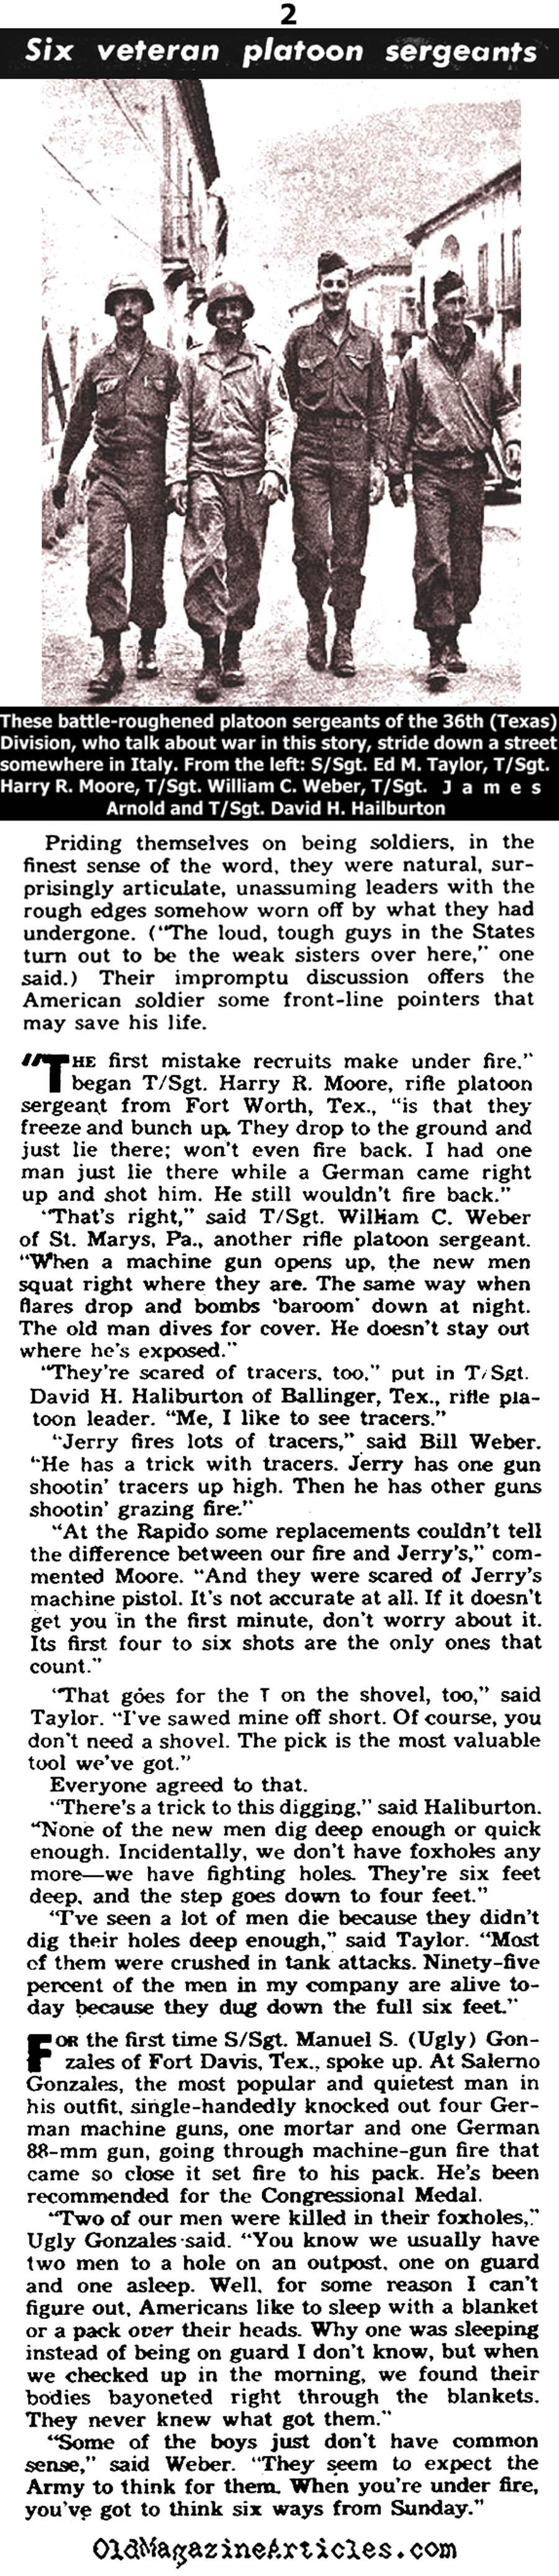 Front-Line Sergeants Talk Combat and Rant About Replacements  (Yank Magazine, 1945)